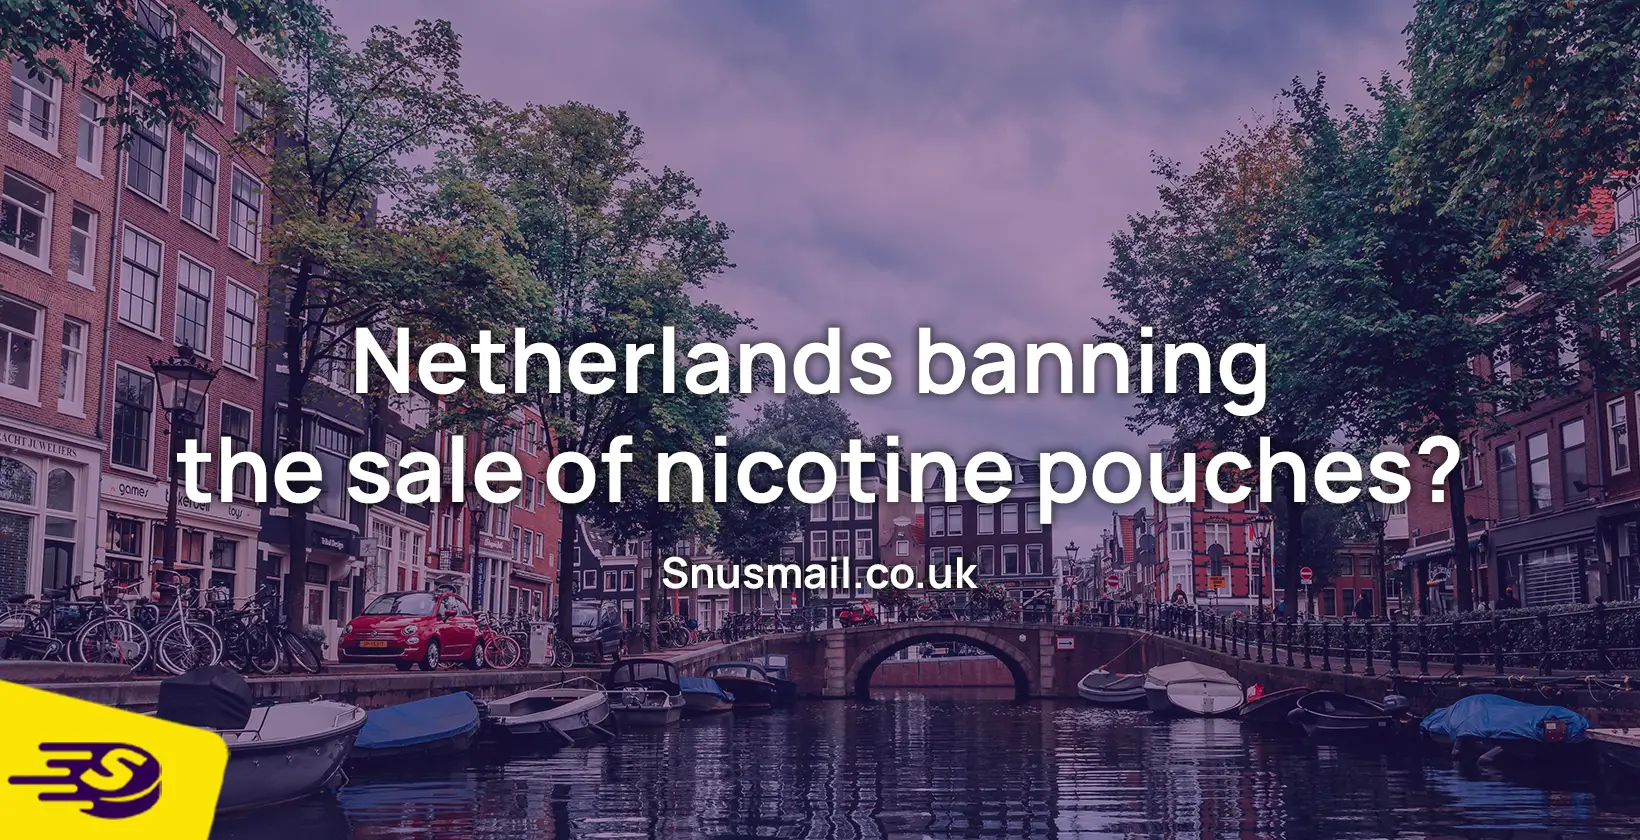 Netherlands banning the sale of nicotine pouches